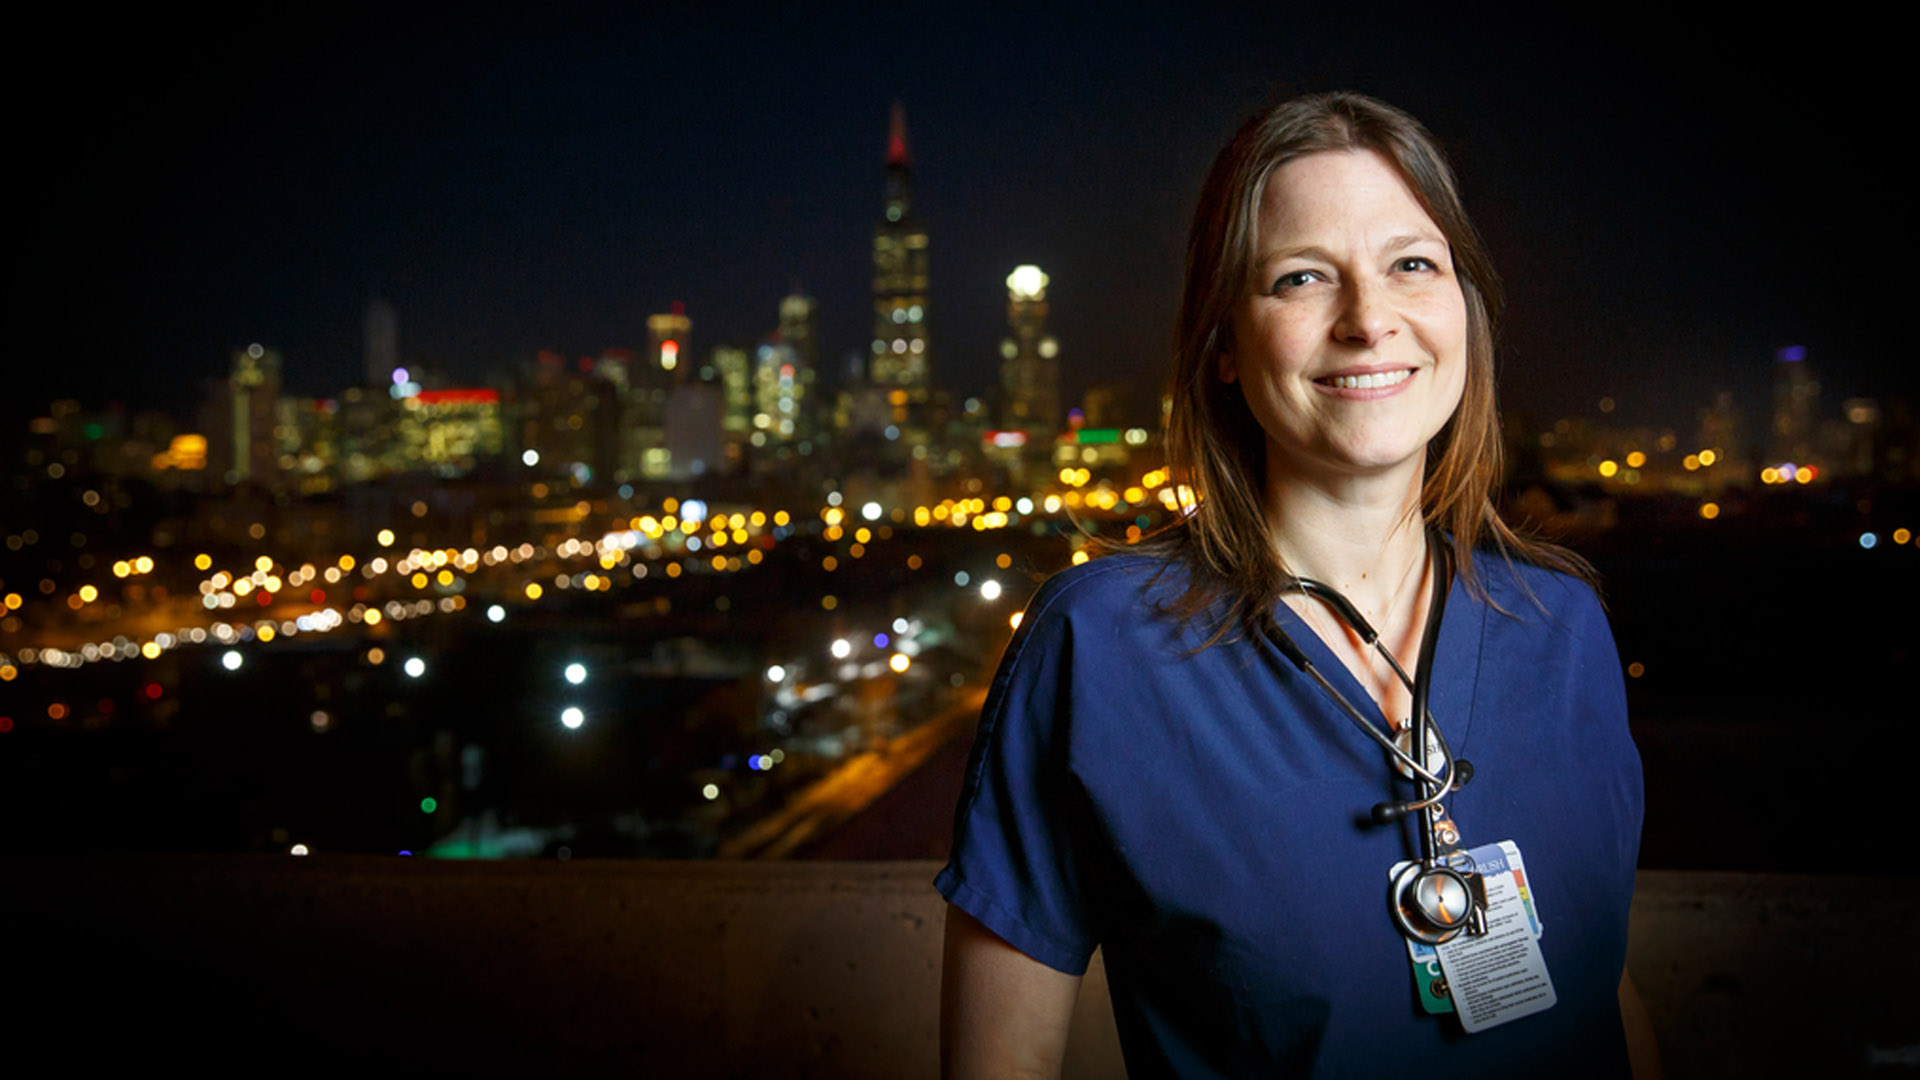 Kirchgessner is an alumna with a business degree who is now serving in a health care setting